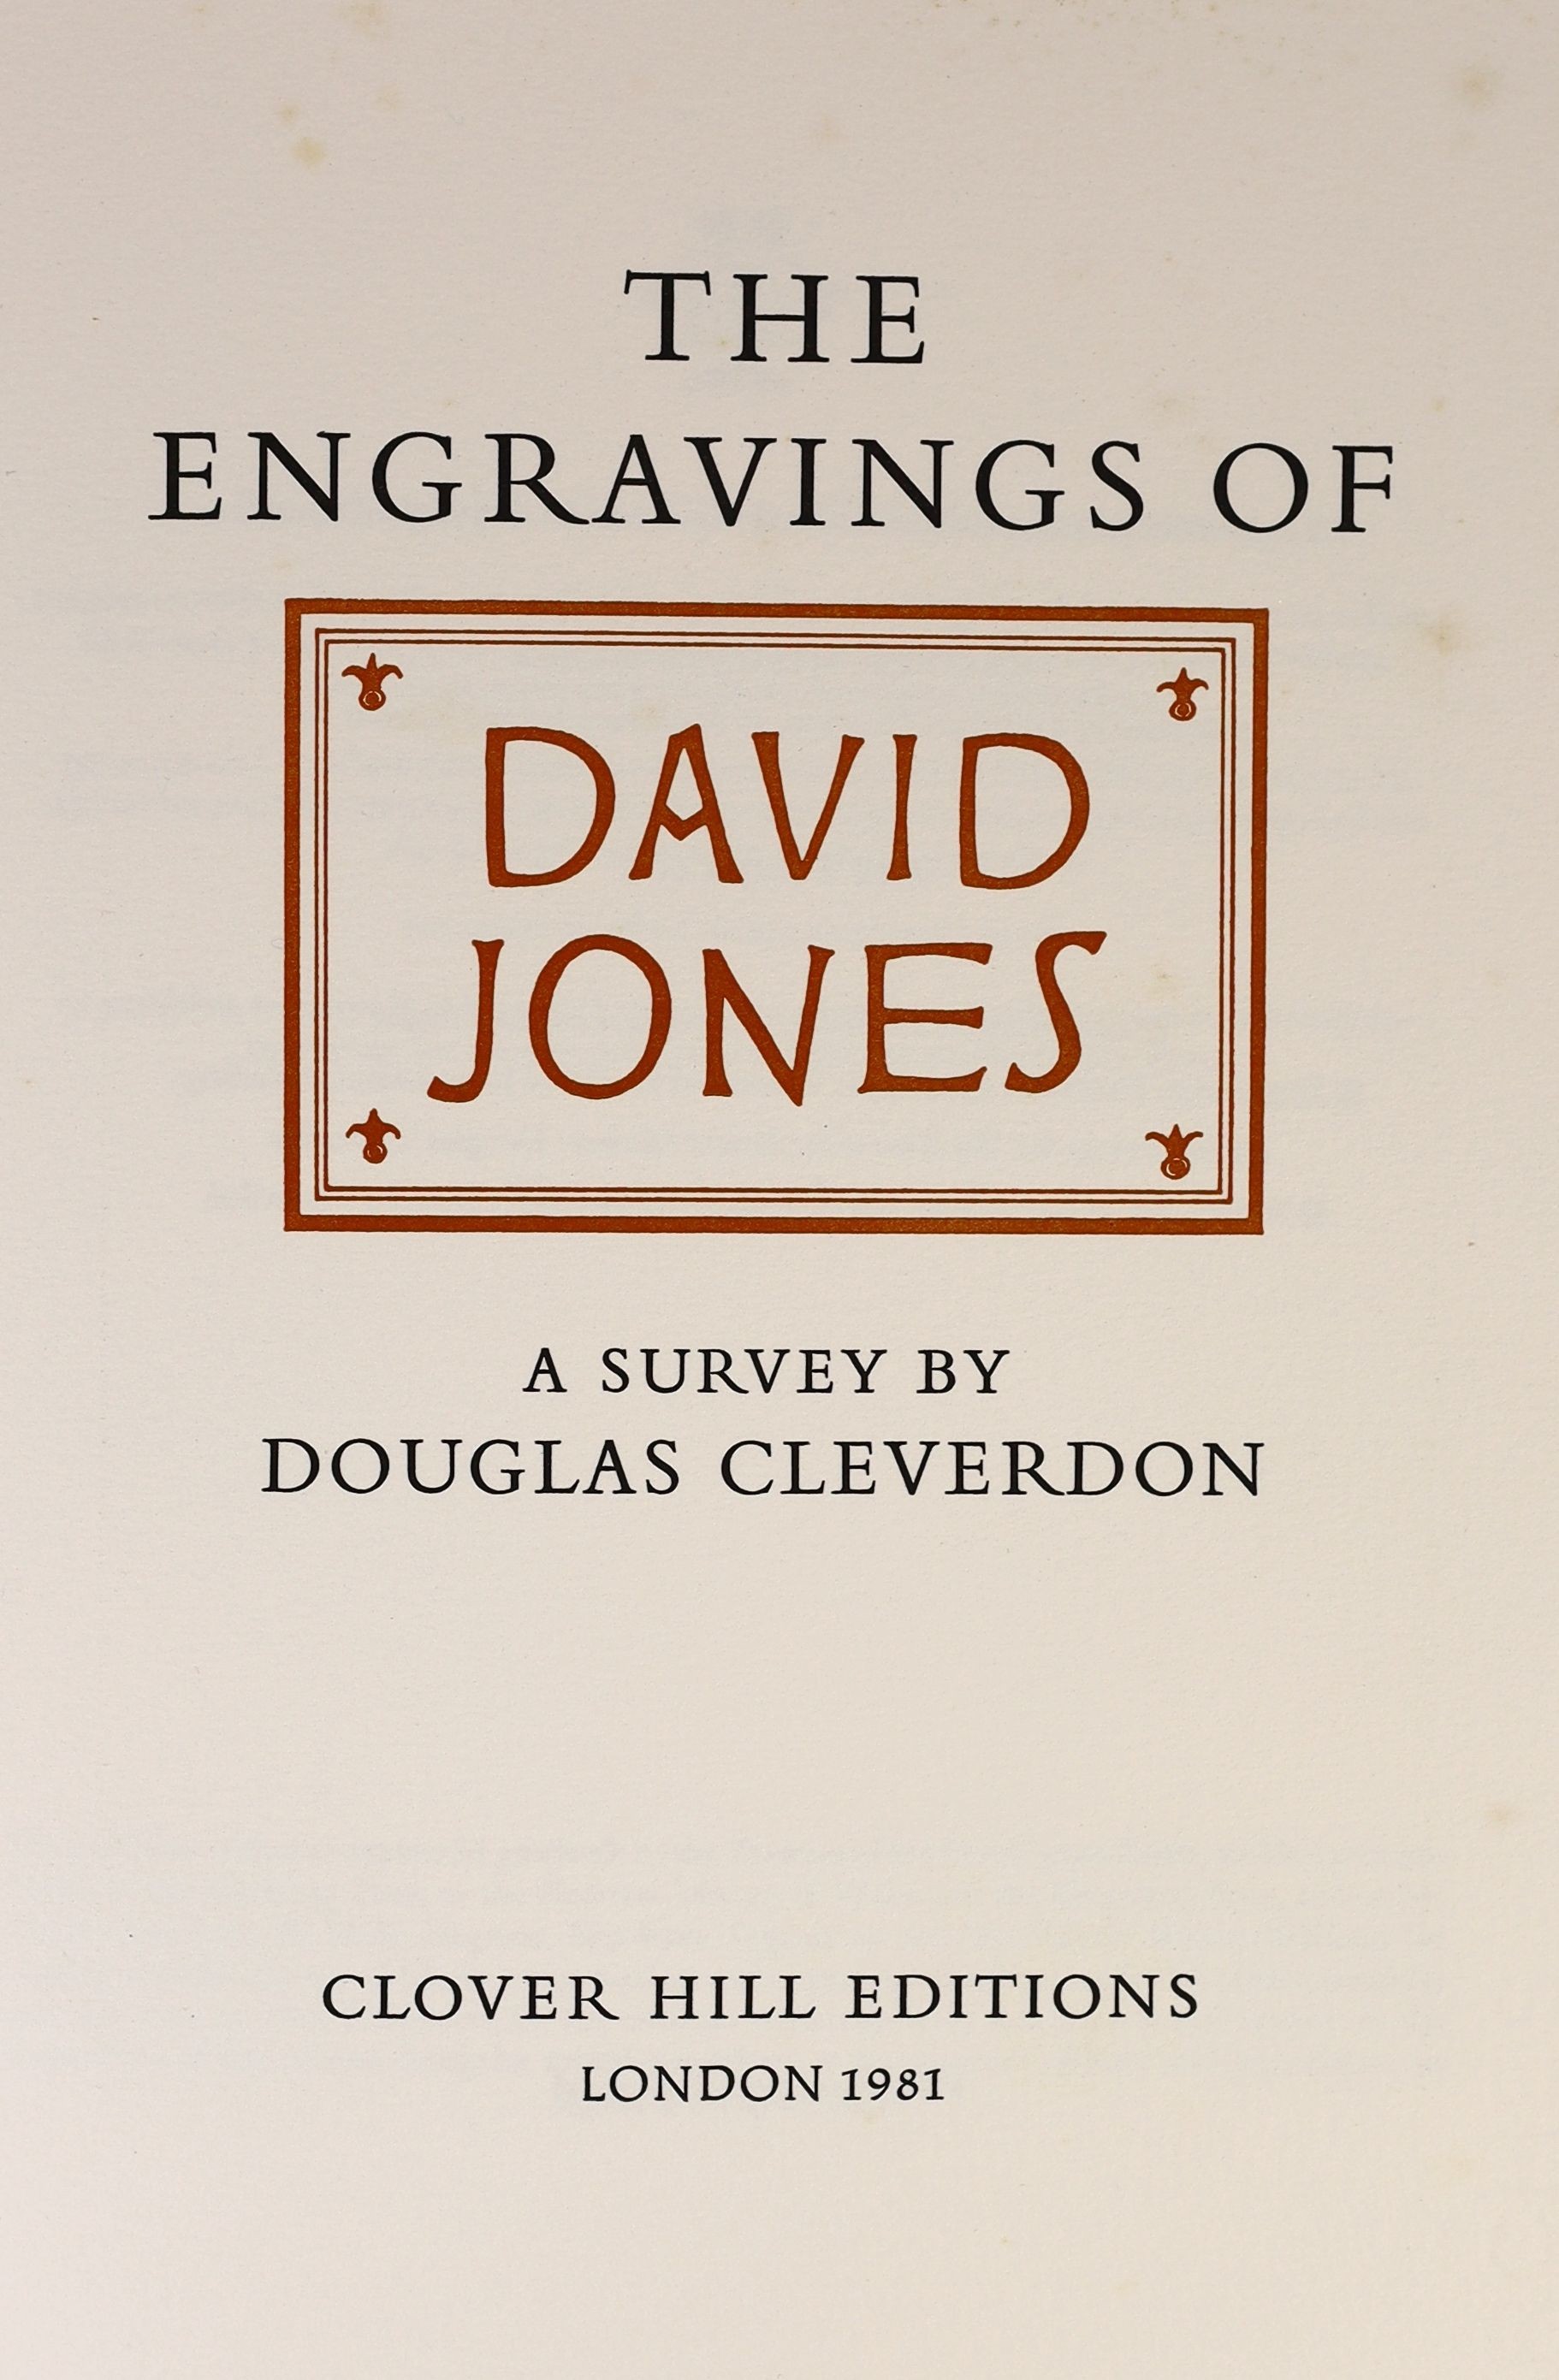 Cleverdon, Douglas - The Engravings of David Jones a Survey. 1st and limited edition, One of 260 copies printed on Vèlin d’Arches paper. Complete with the stated 96 plates, many of which are coloured, plus a tipped-in fr